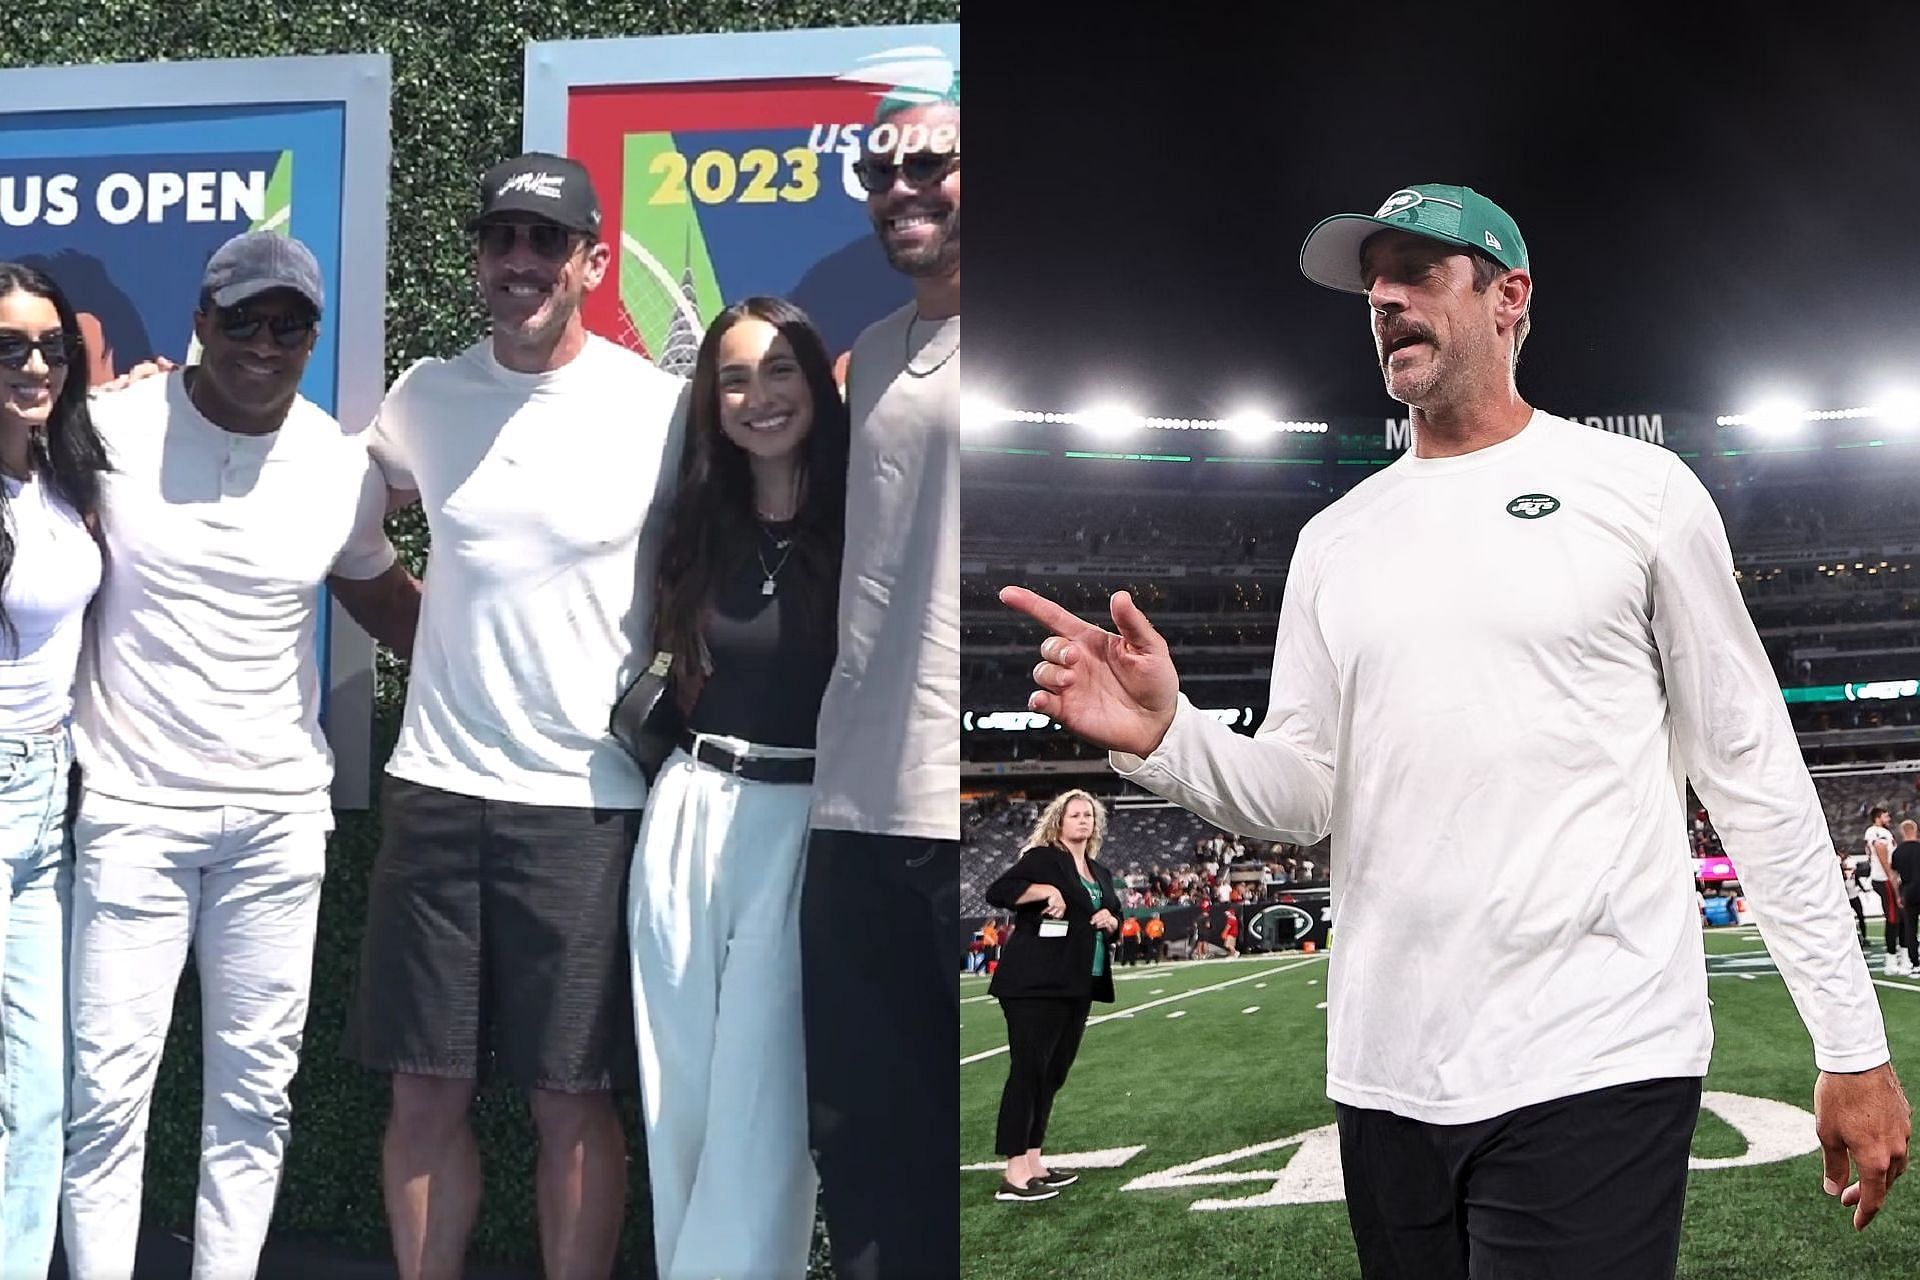 Aaron Rodgers links up with Randall Cobb and C.J. Uzomah at the US Open